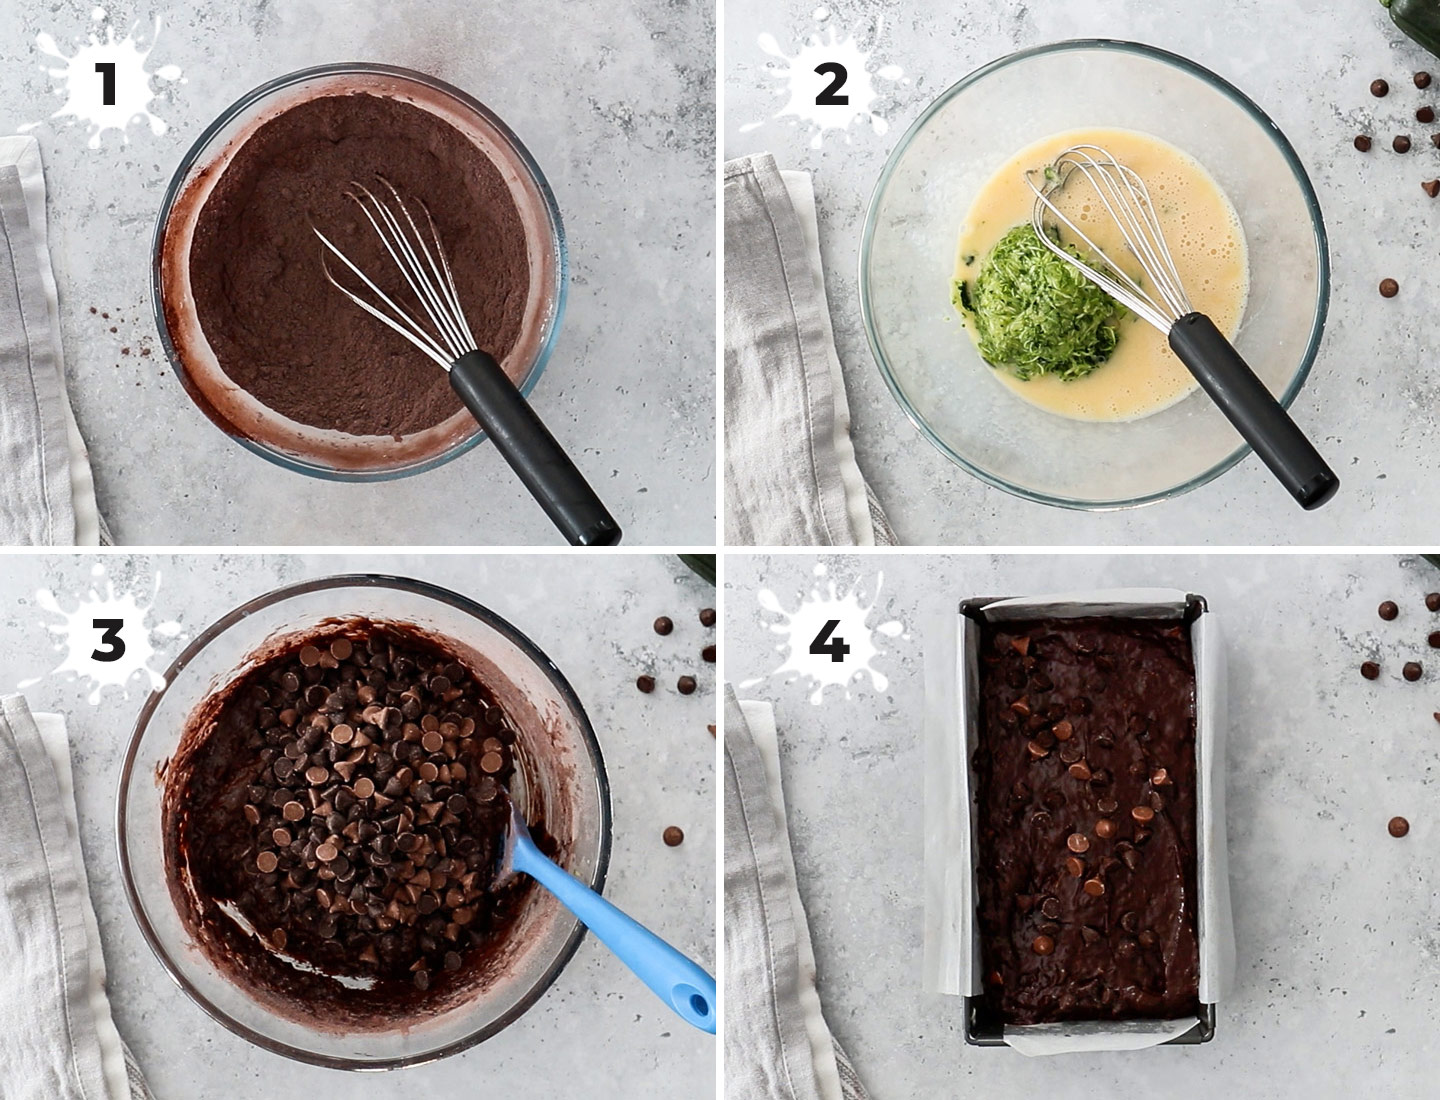 A collage showing how to make chocolate zucchini cake.